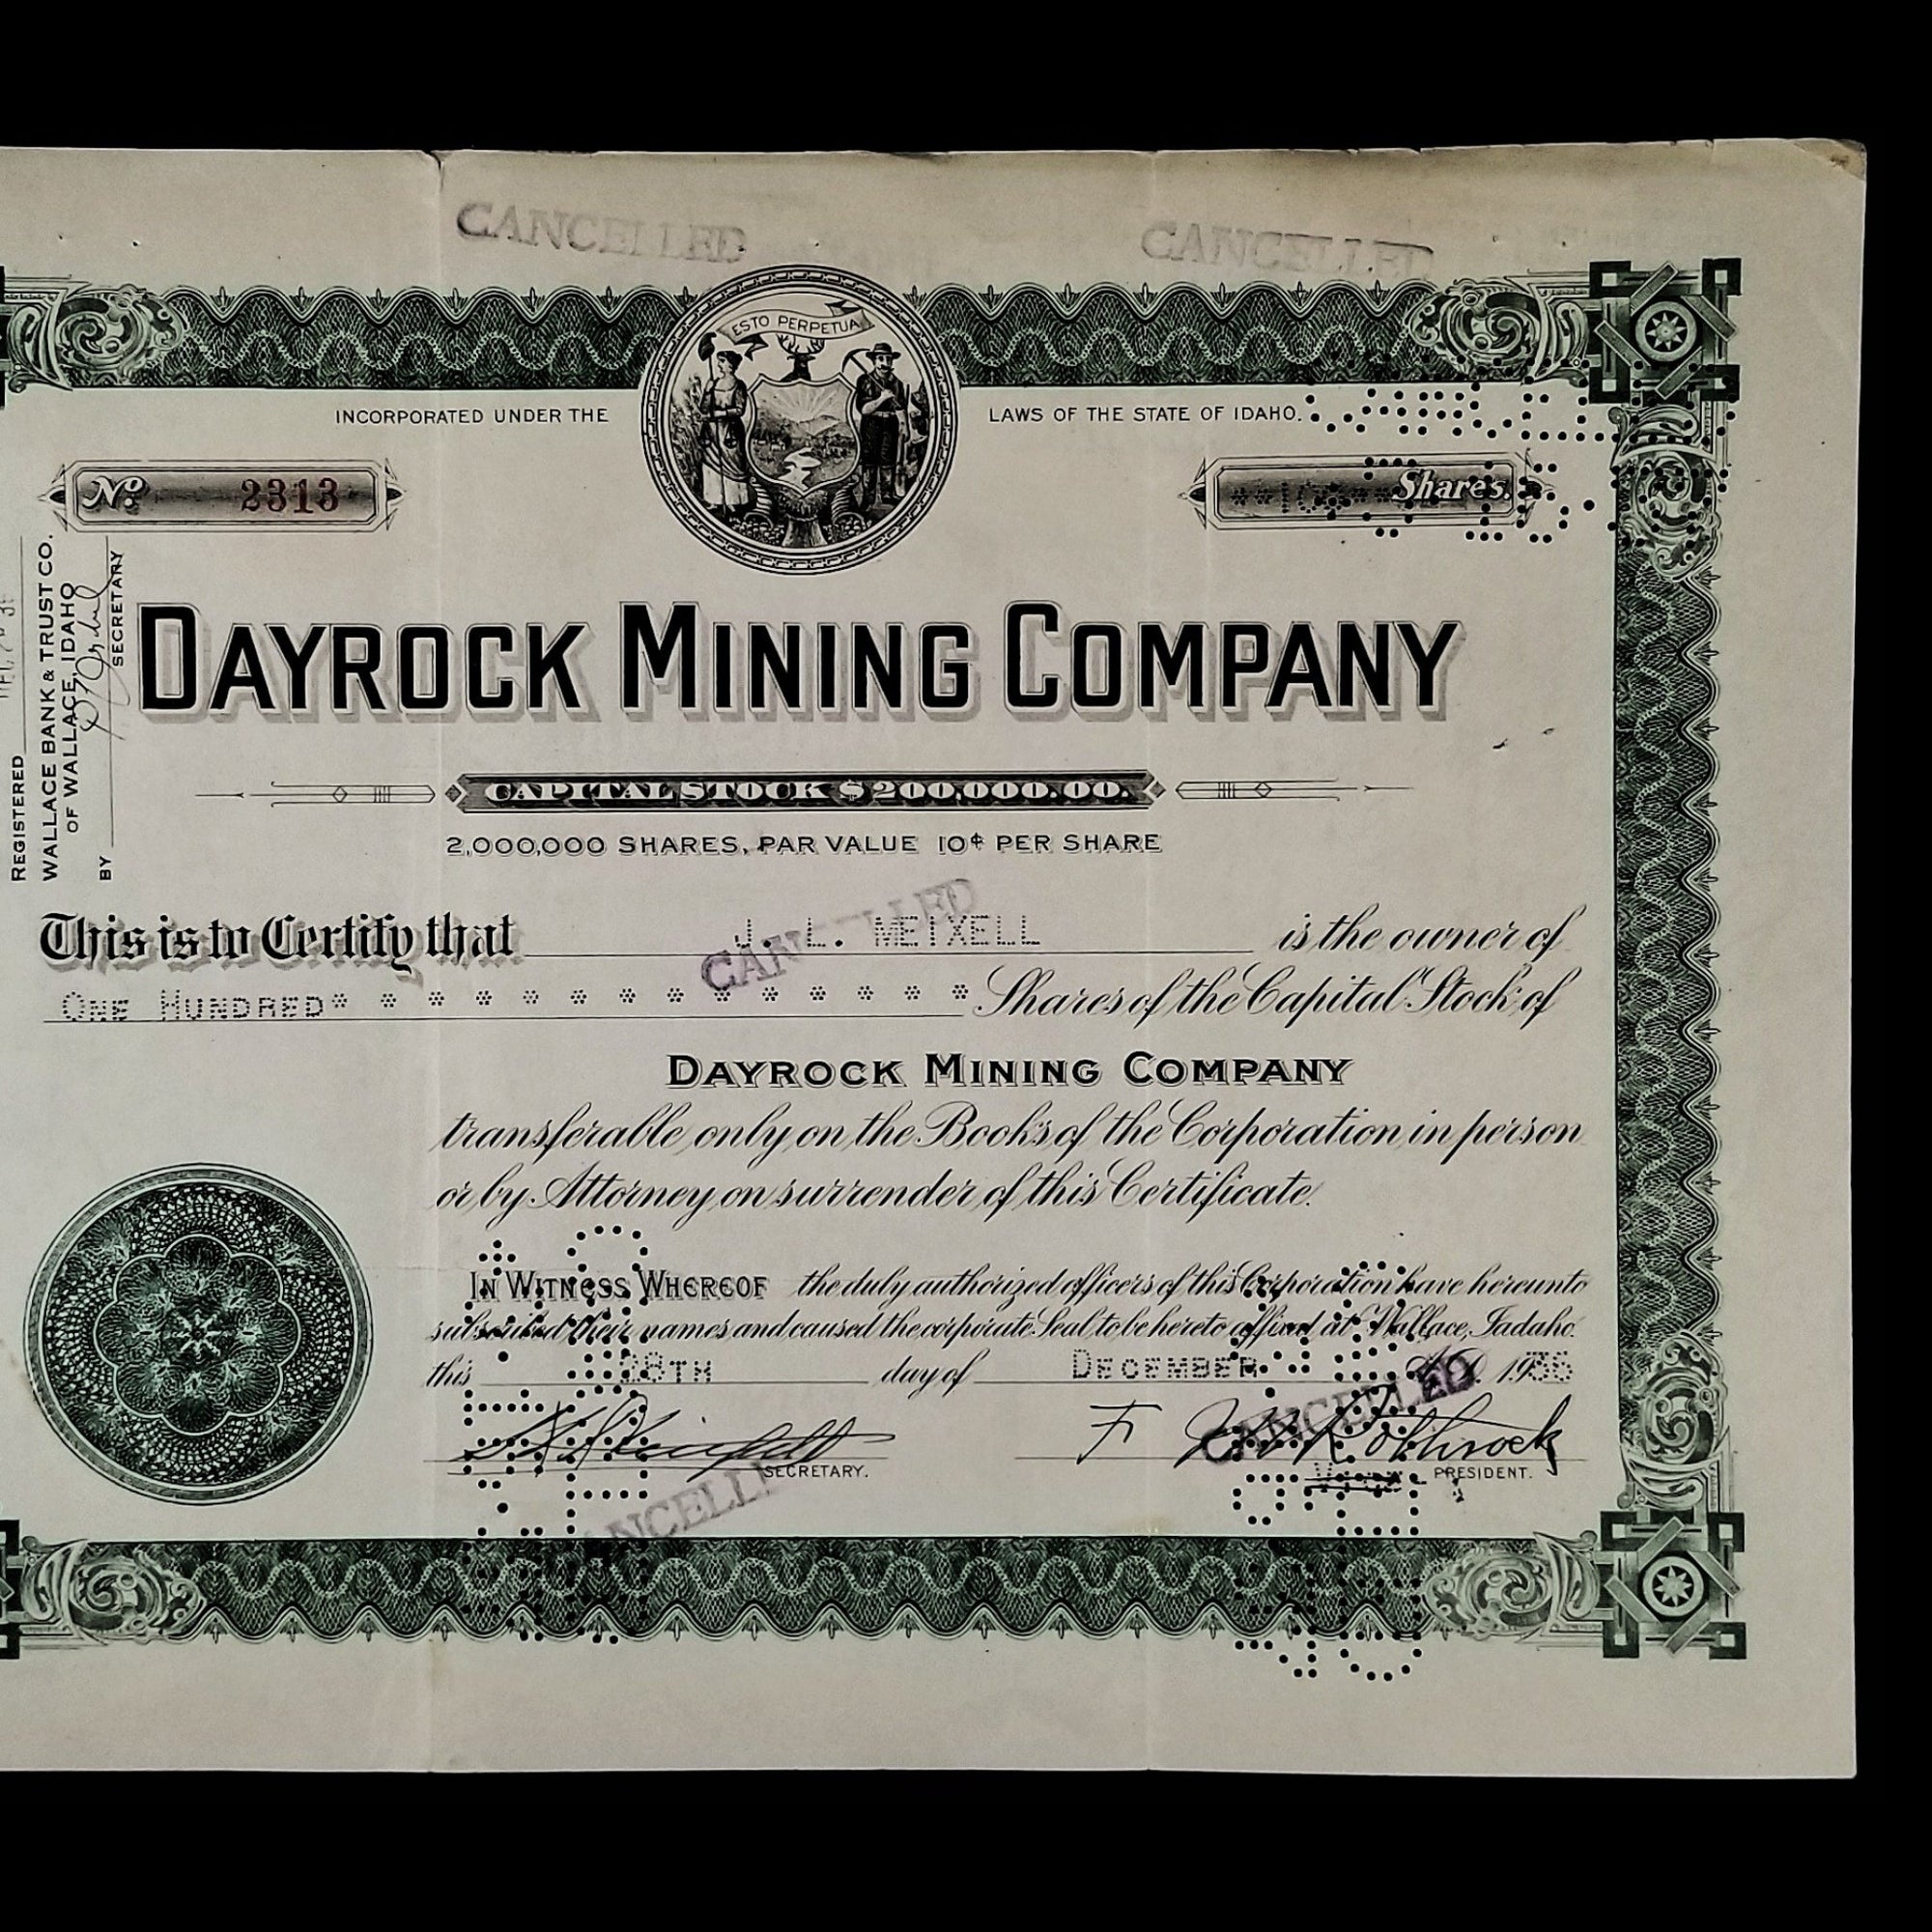 Dayrock Mining Co. Stock Certificate - 1930's - Great Depression